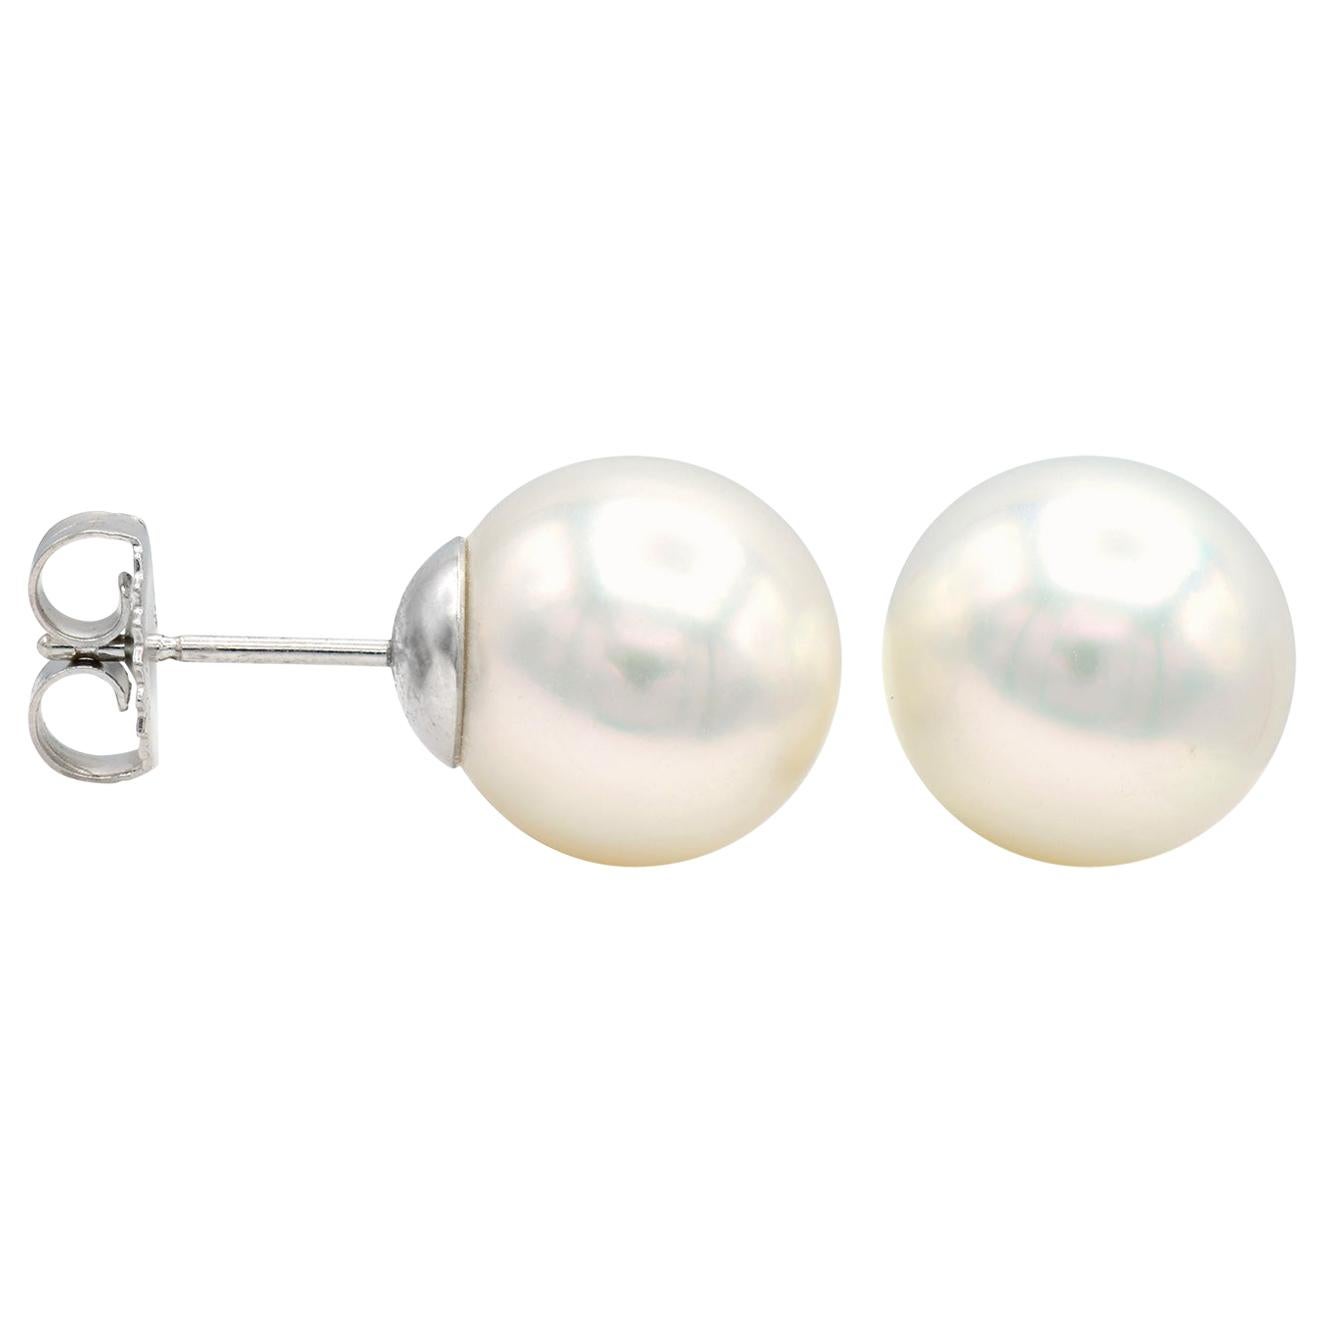 12-12.5mm South Sea Pearl Stud Earrings with 14 Karat White Gold Posts and Backs For Sale